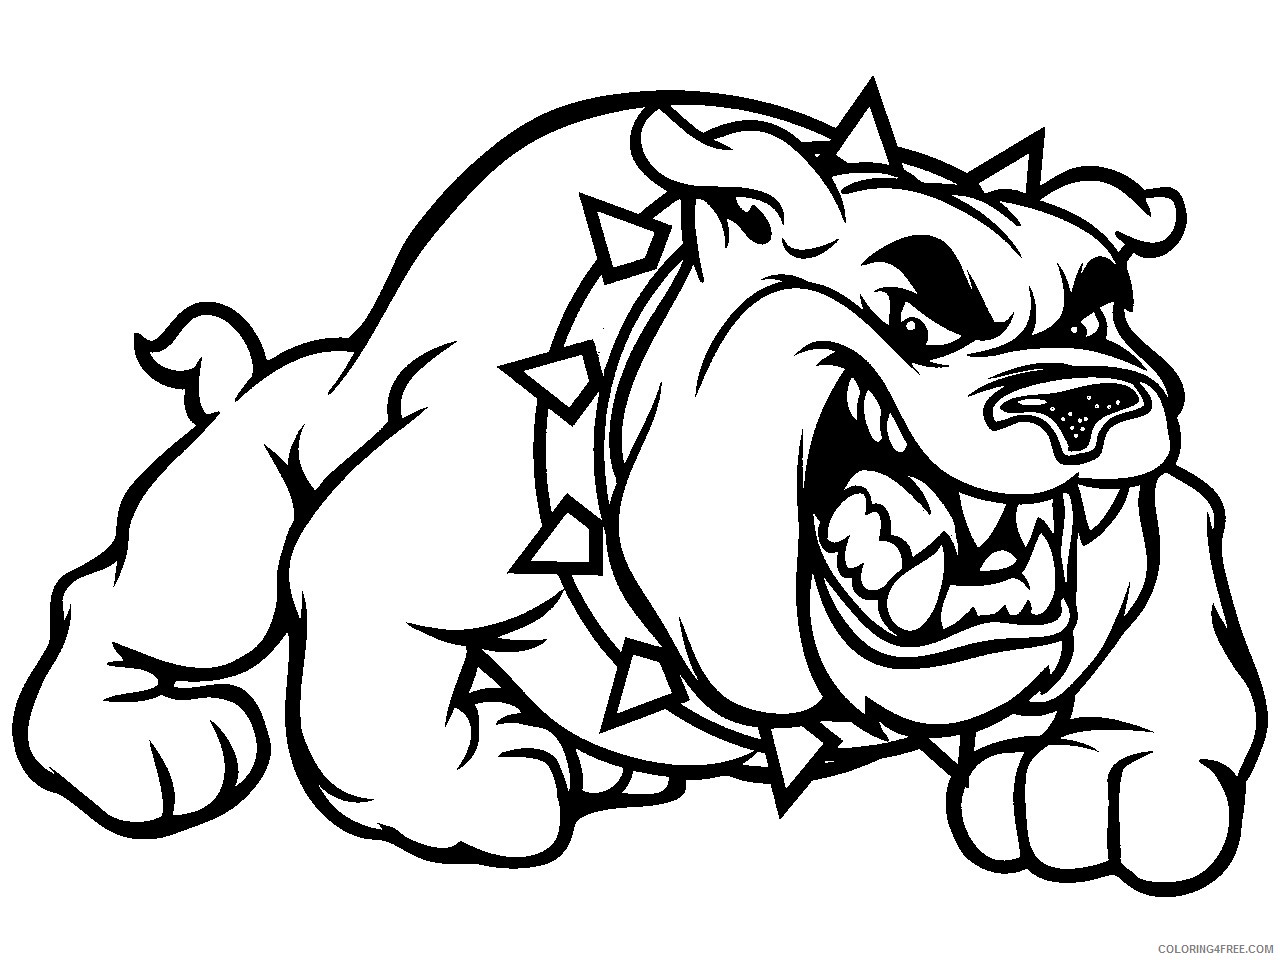 Black And White Bulldog Coloring Pages Disegni Bulldog Disegni Da Colorare Printable Coloring4free Coloring4free Com